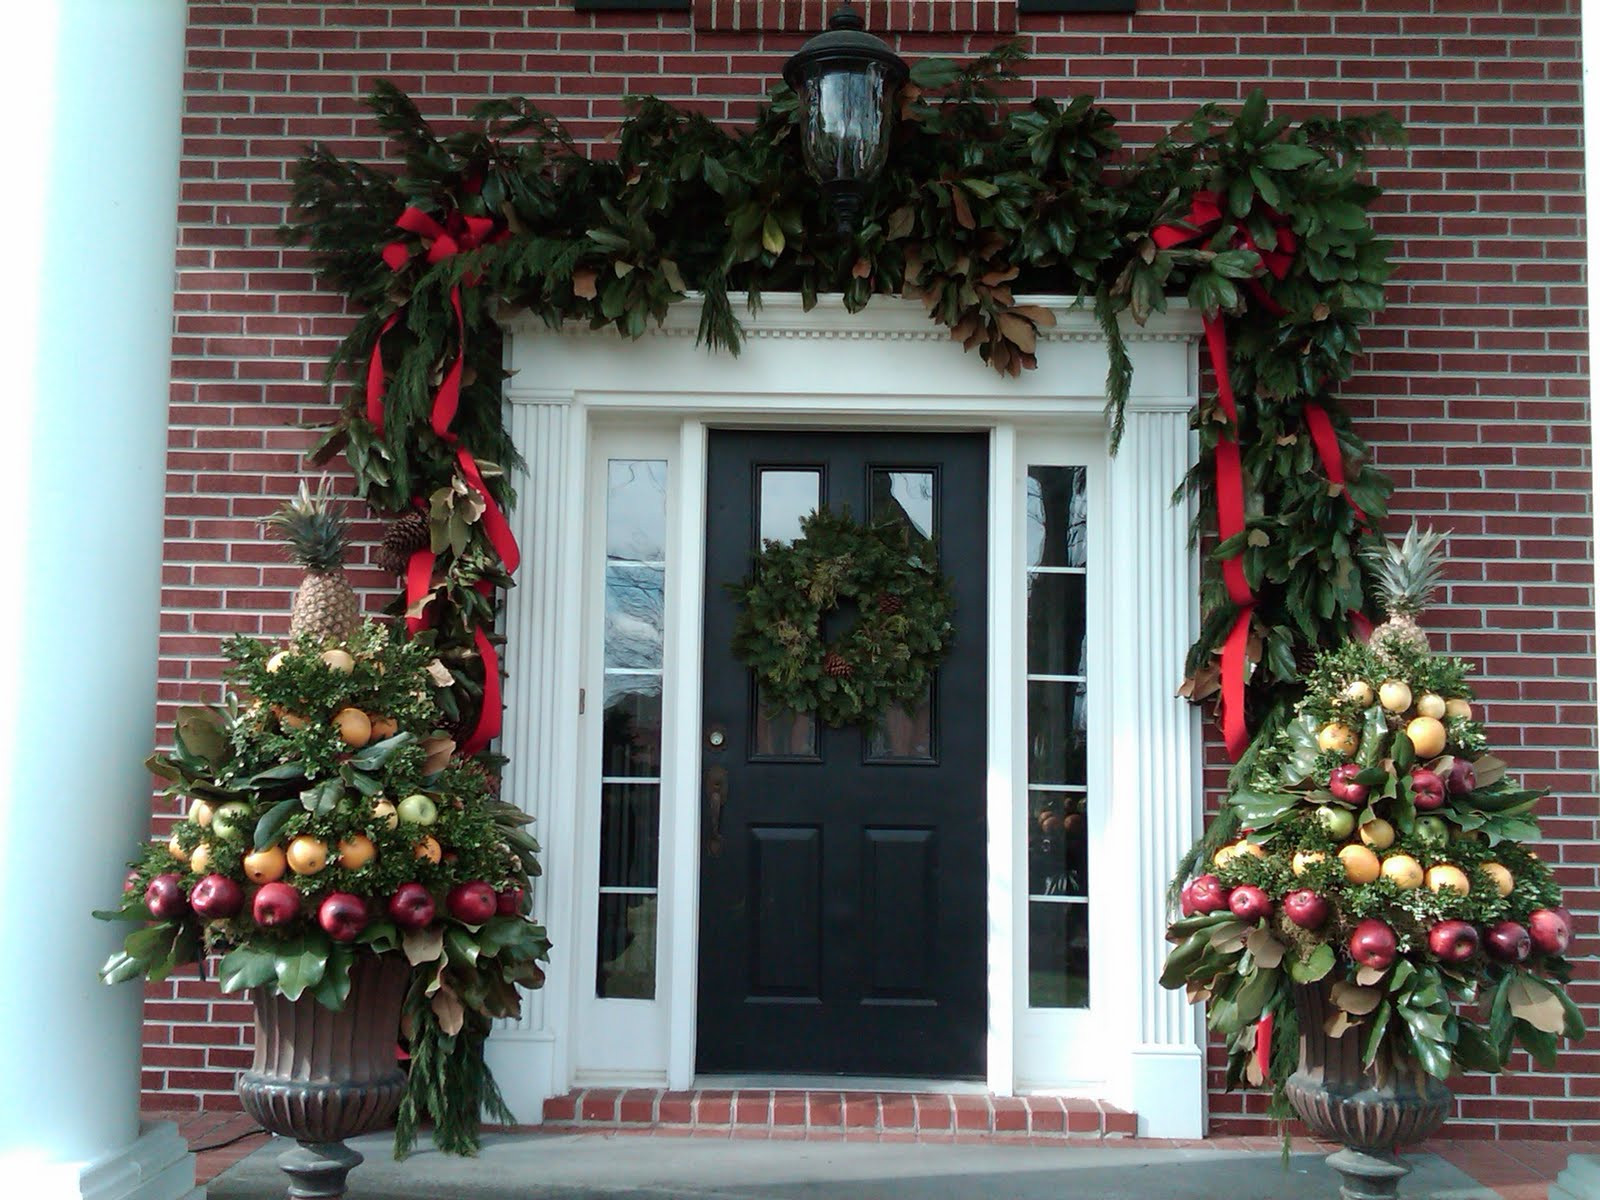 Christmas Porch Ideas
 Anyone Can Decorate The Christmas Porch